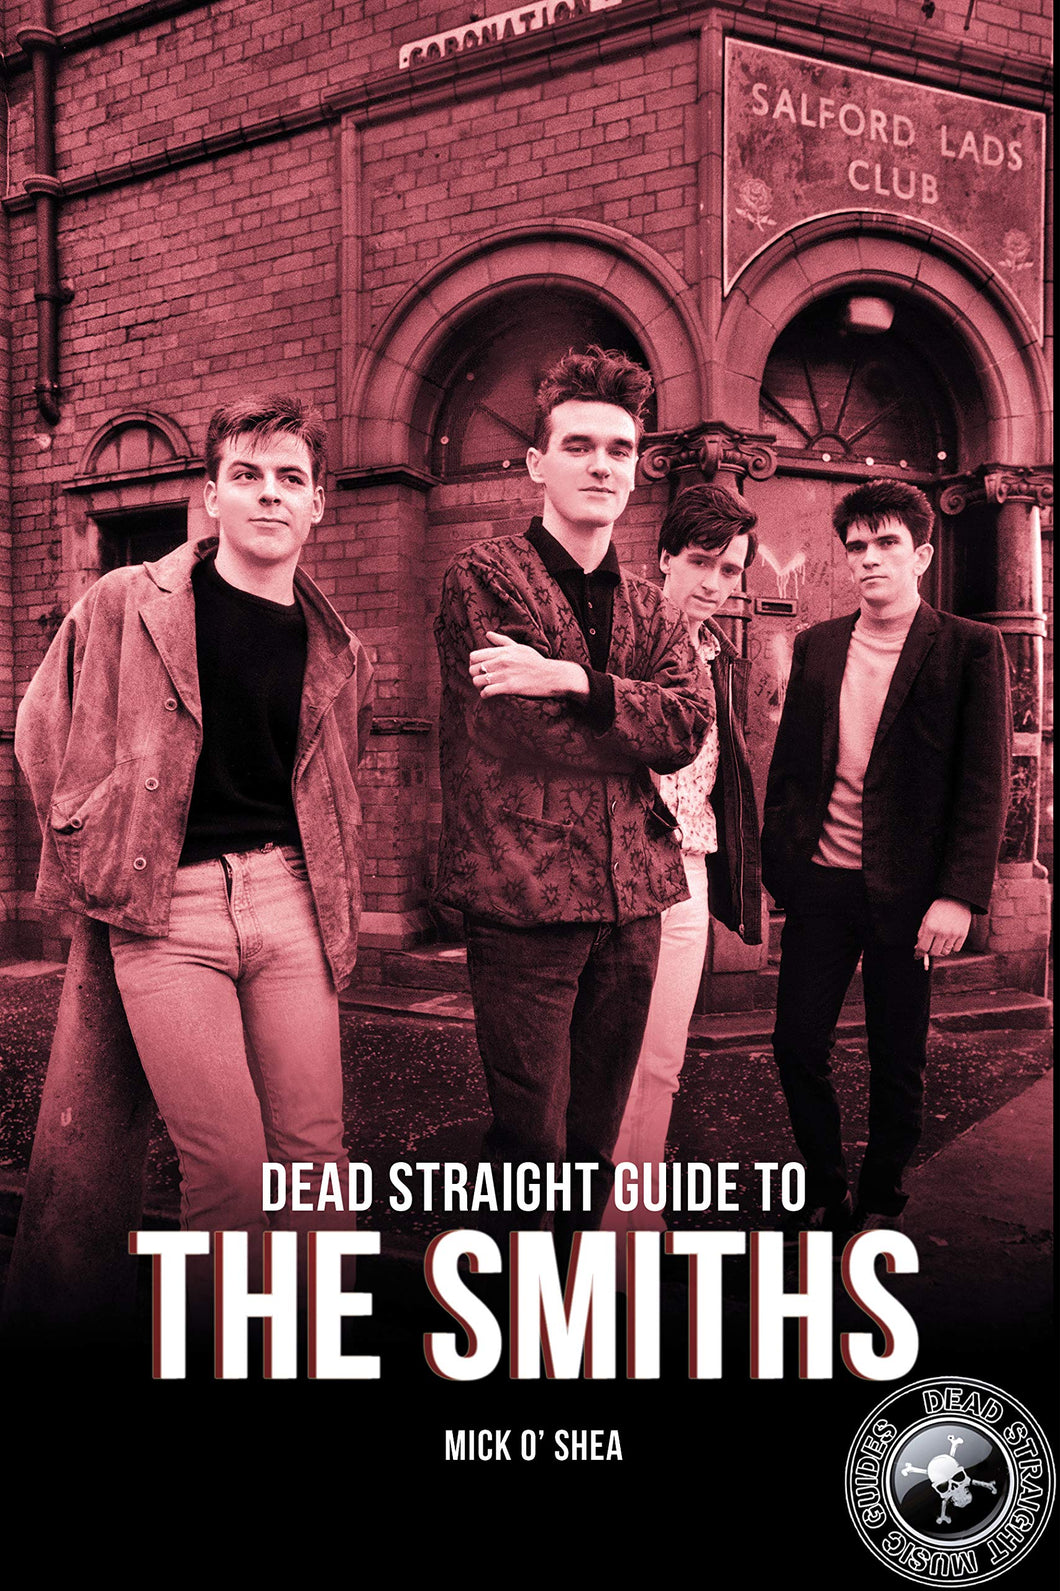 Mick O'Shea-  Dead Straight Guide To The Smiths